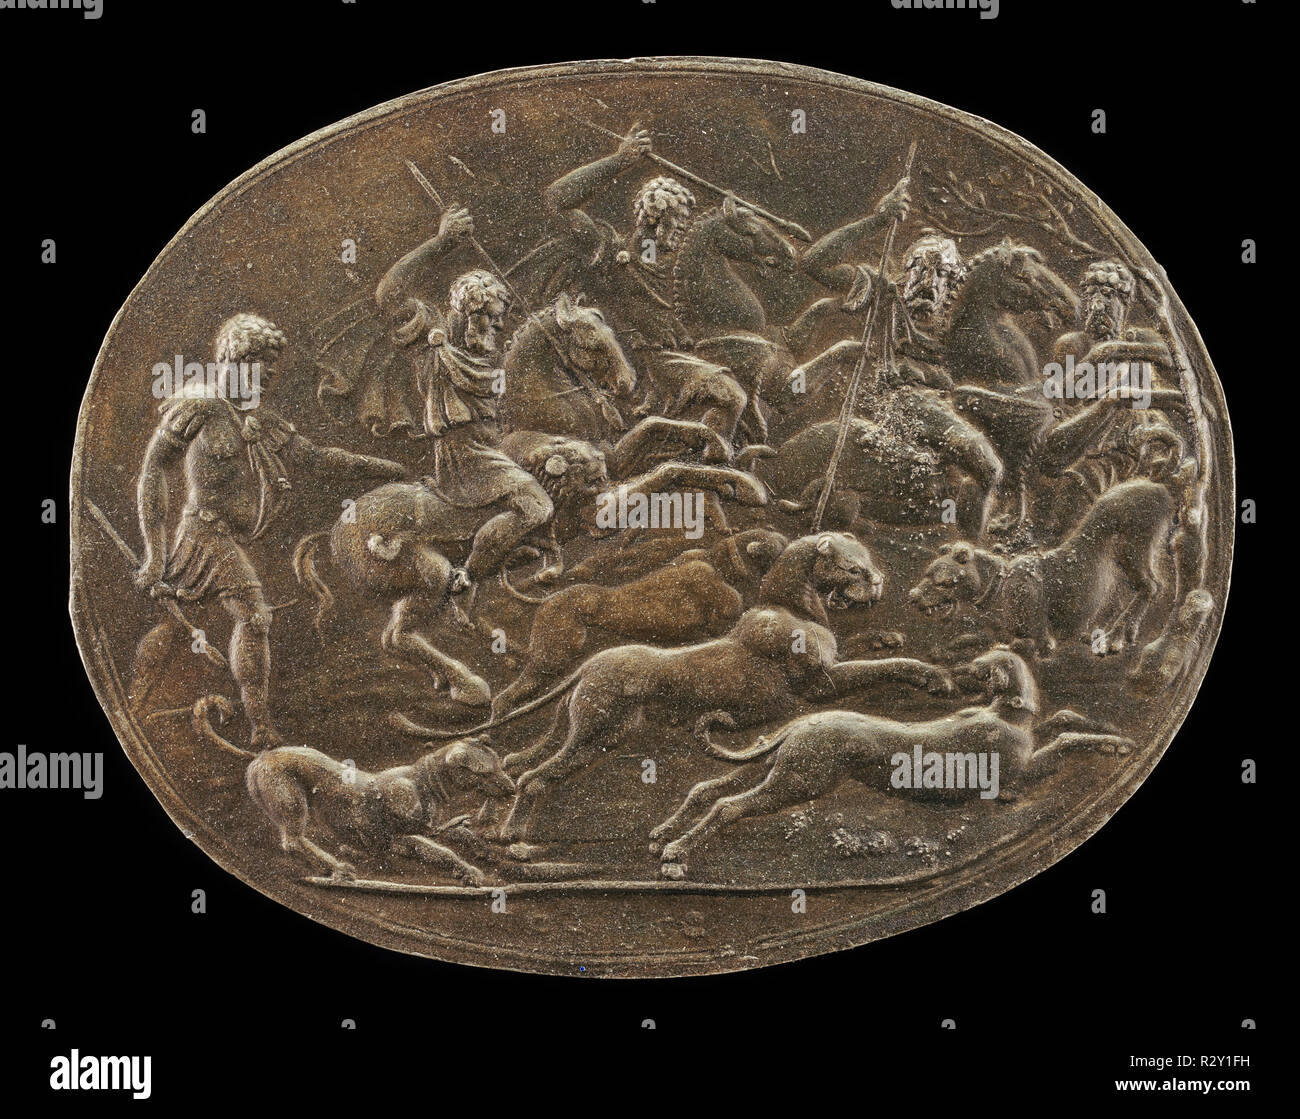 A Panther Hunt. Dimensions: overall (oval): 6.6 x 8.3 cm (2 5/8 x 3 1/4 in.) gross weight: 37 gr. Medium: lead//Very dark brown patina. Museum: National Gallery of Art, Washington DC. Author: GIOVANNI BERNARDI. Stock Photo